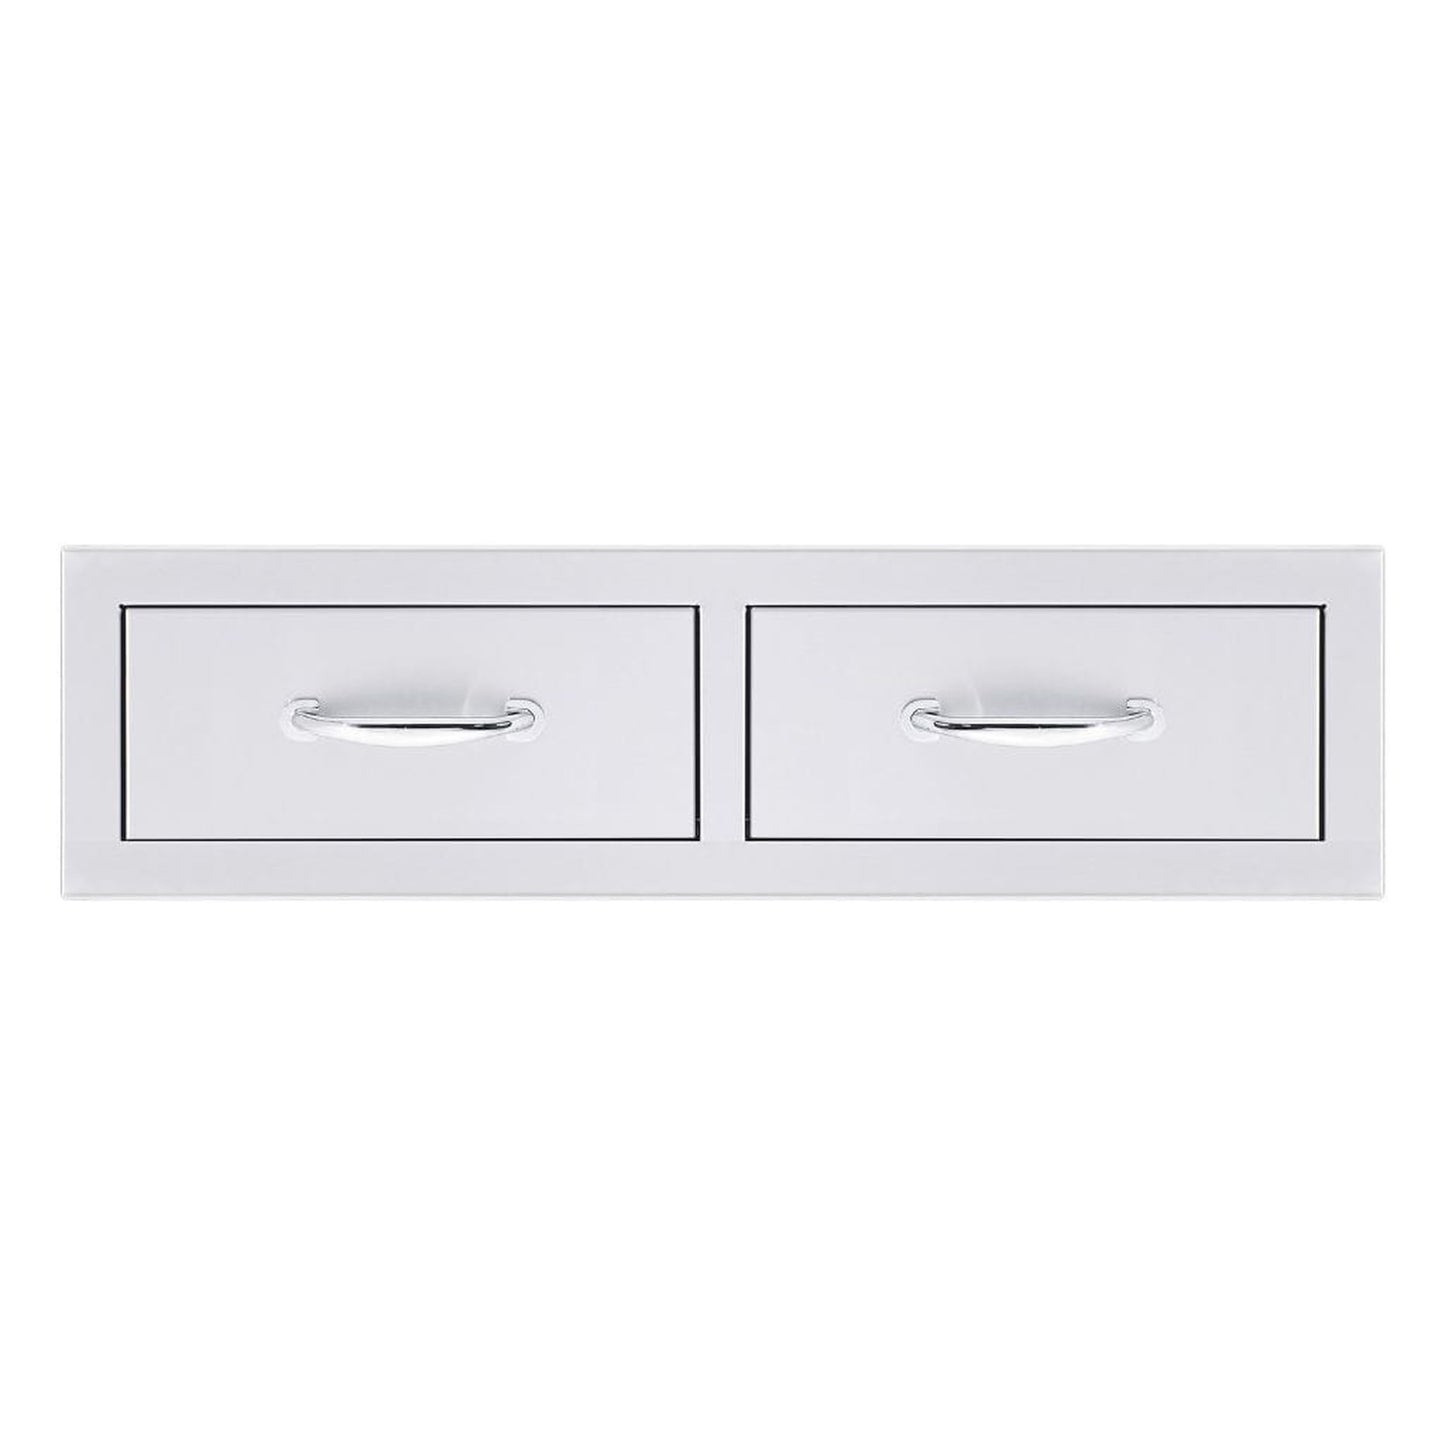 Summerset 32" Stainless Steel Flush Mount Horizontal Double Access Drawer